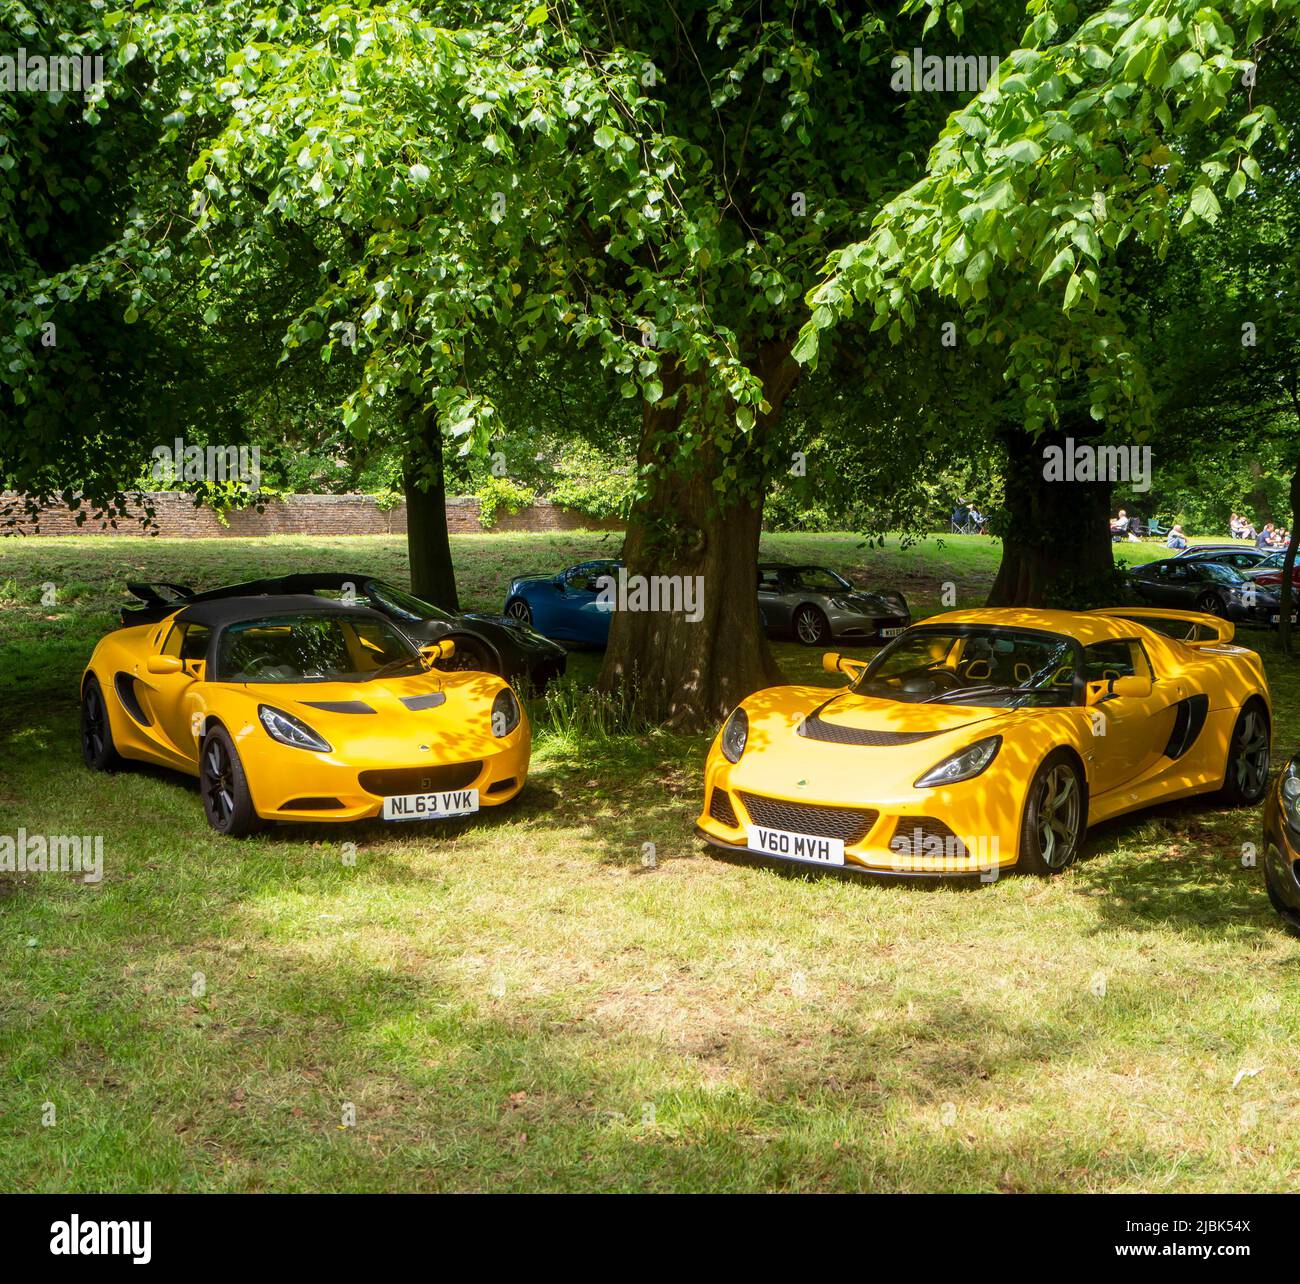 Pair of yellow Lotus sports cars under a canopy of trees Stock Photo